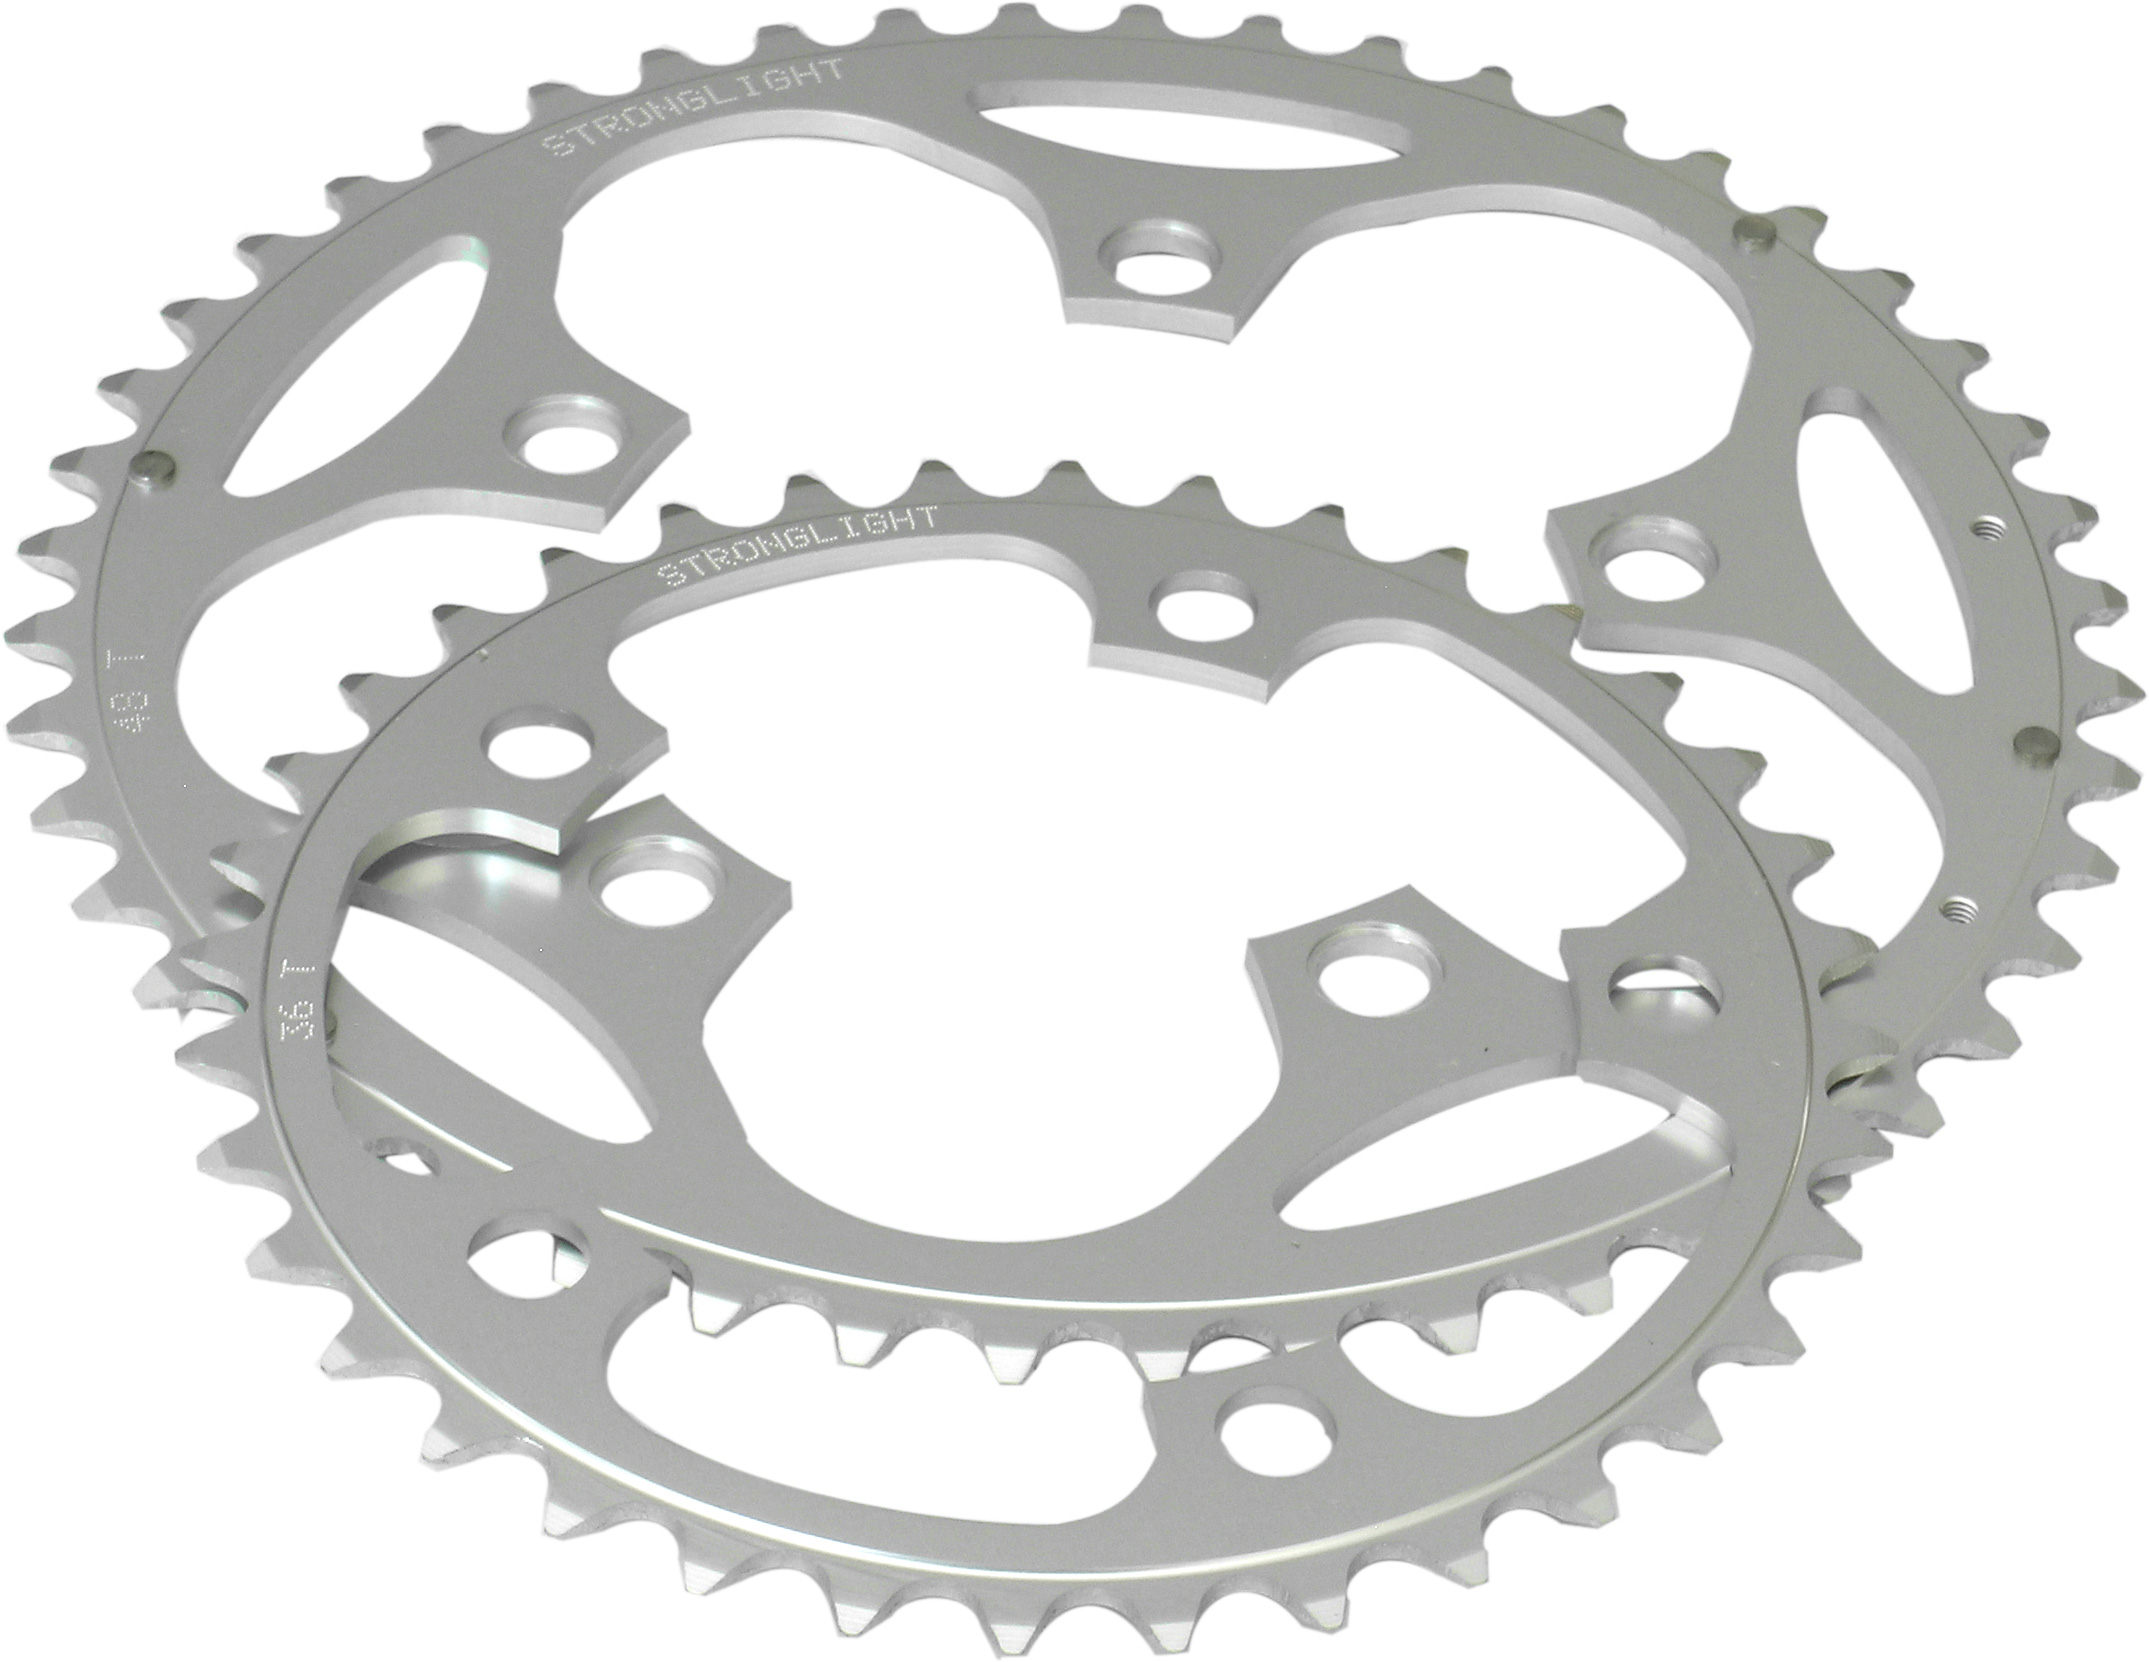 RD13552 Stronglight 52T 5-Arm/135mm Chainring